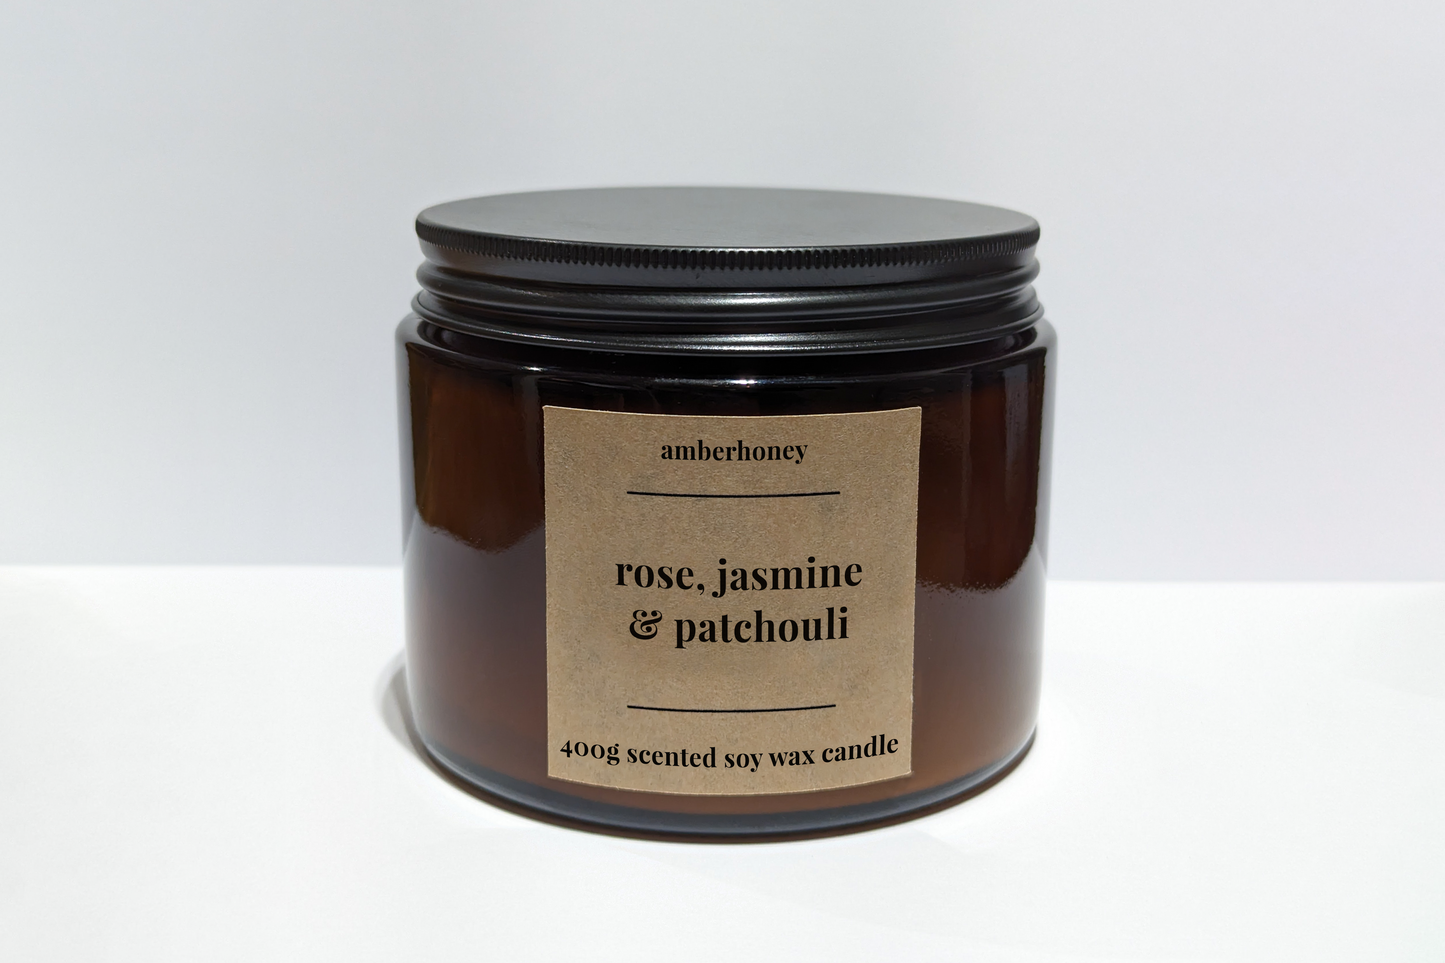 400g rose, jasmine & patchouli soy wax candle (3 wick)